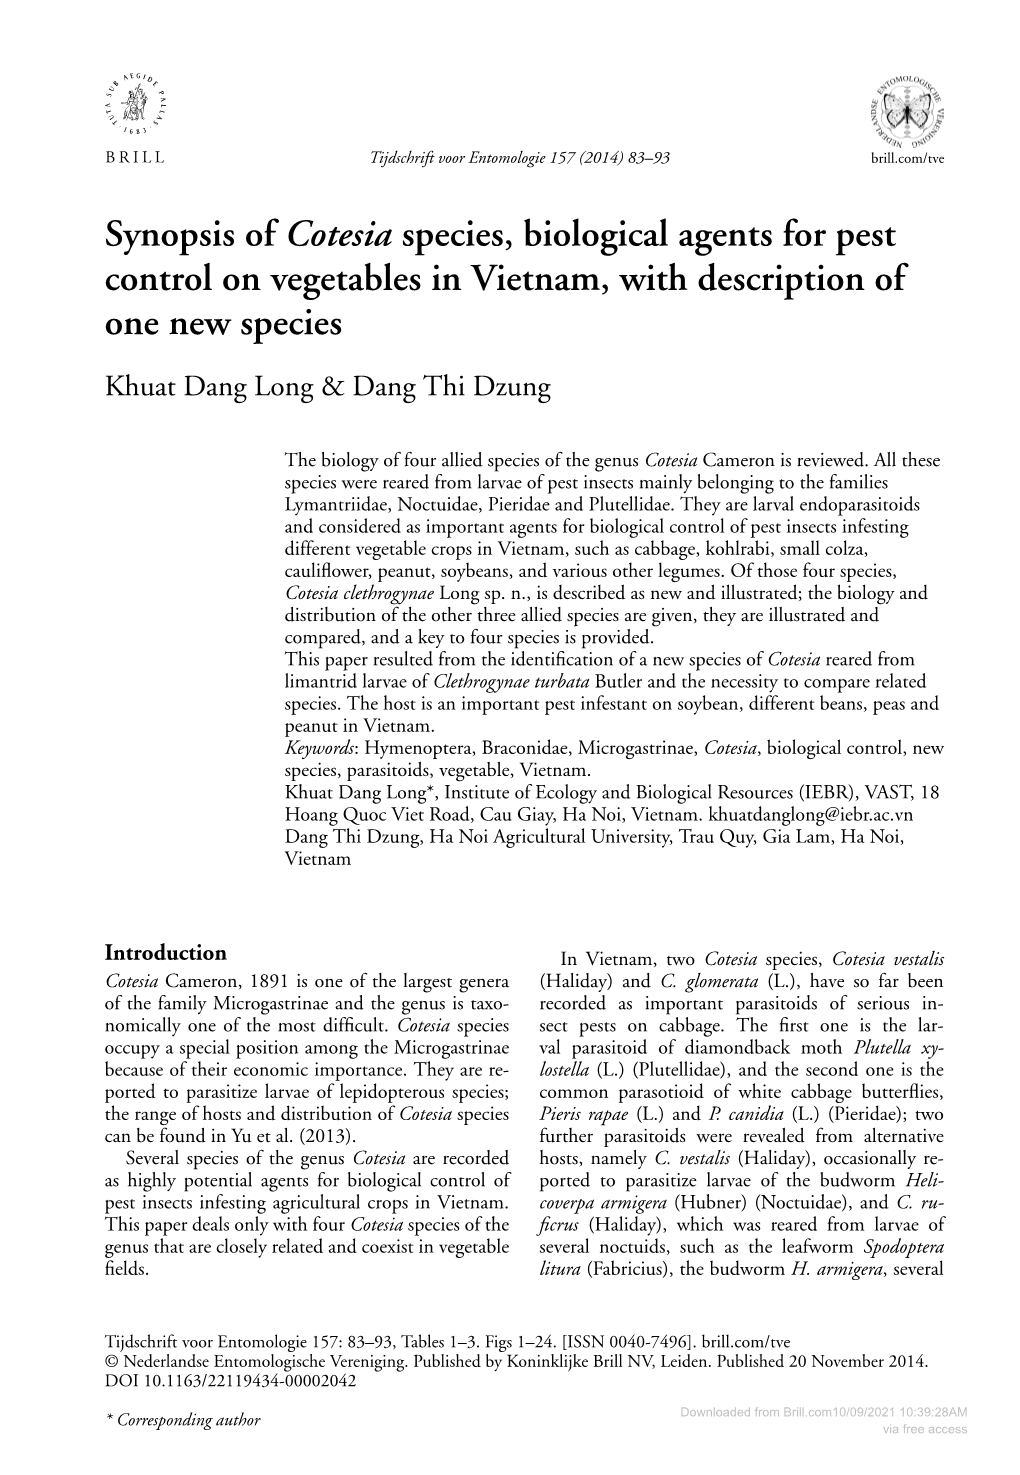 Synopsis of Cotesia Species, Biological Agents for Pest Control on Vegetables in Vietnam, with Description of One New Species Khuat Dang Long & Dang Thi Dzung